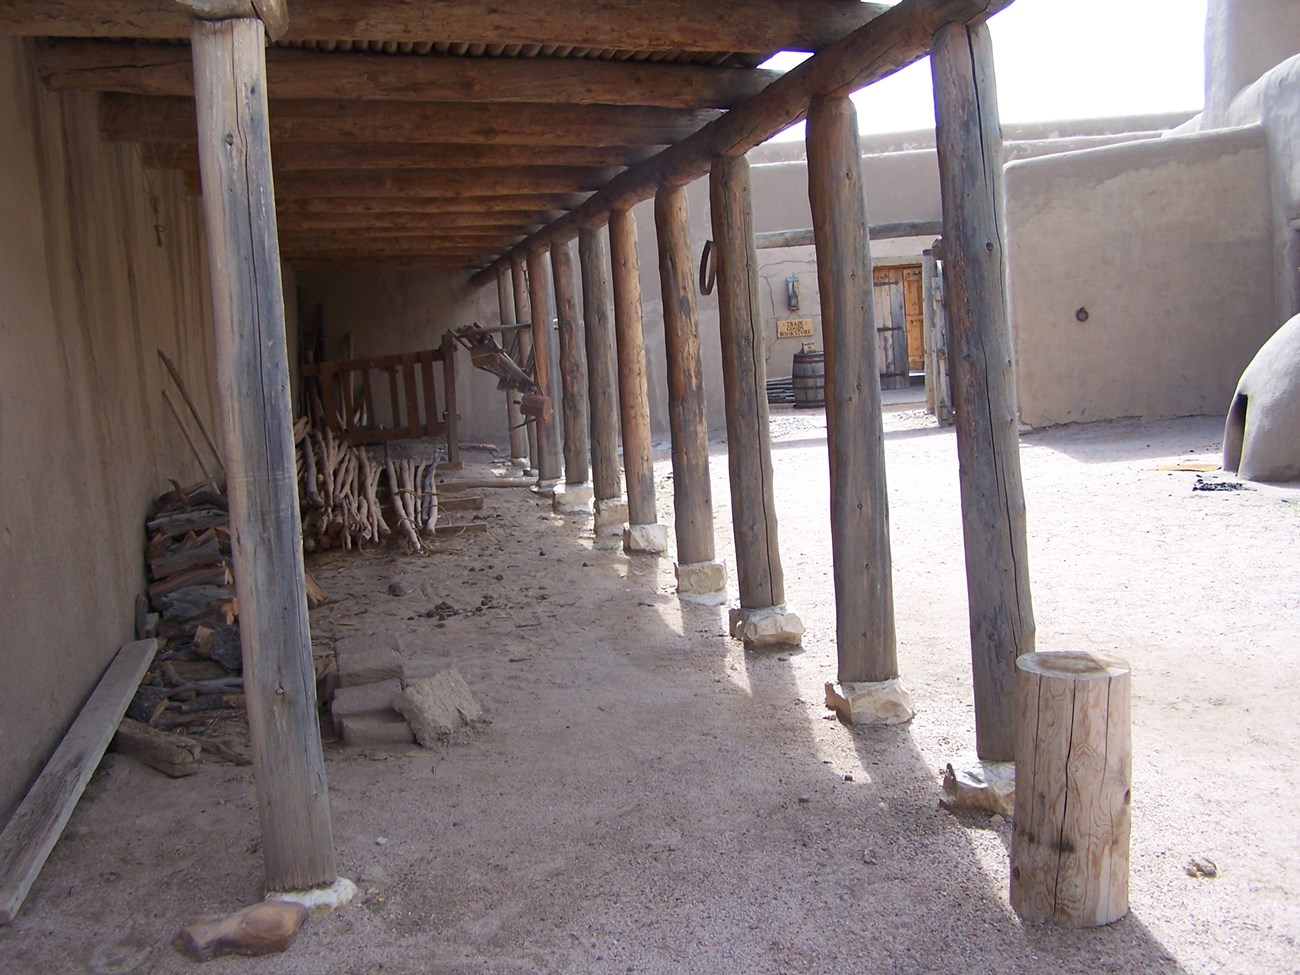 An enclosed corral defined by adobe walls